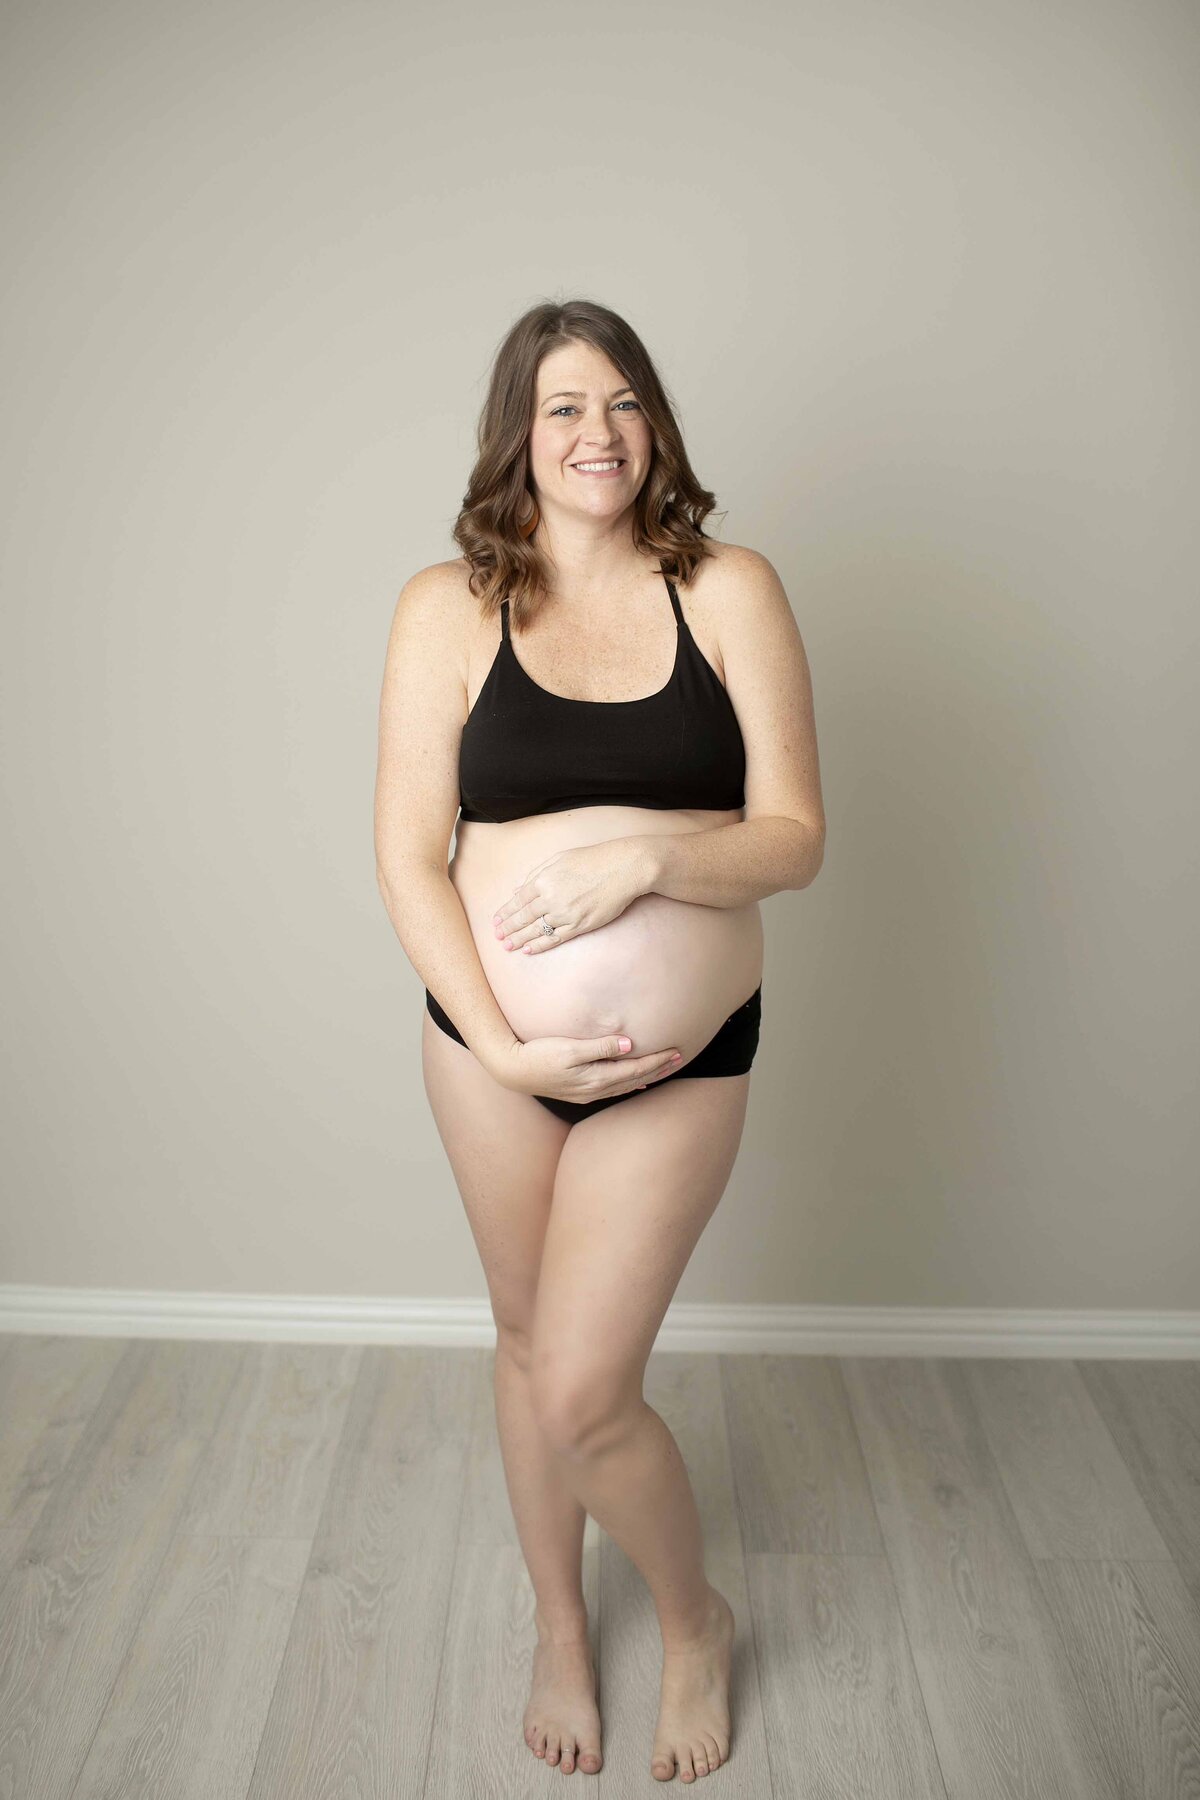 Expectant mom posing at the studio of Chunky Monkey Photography